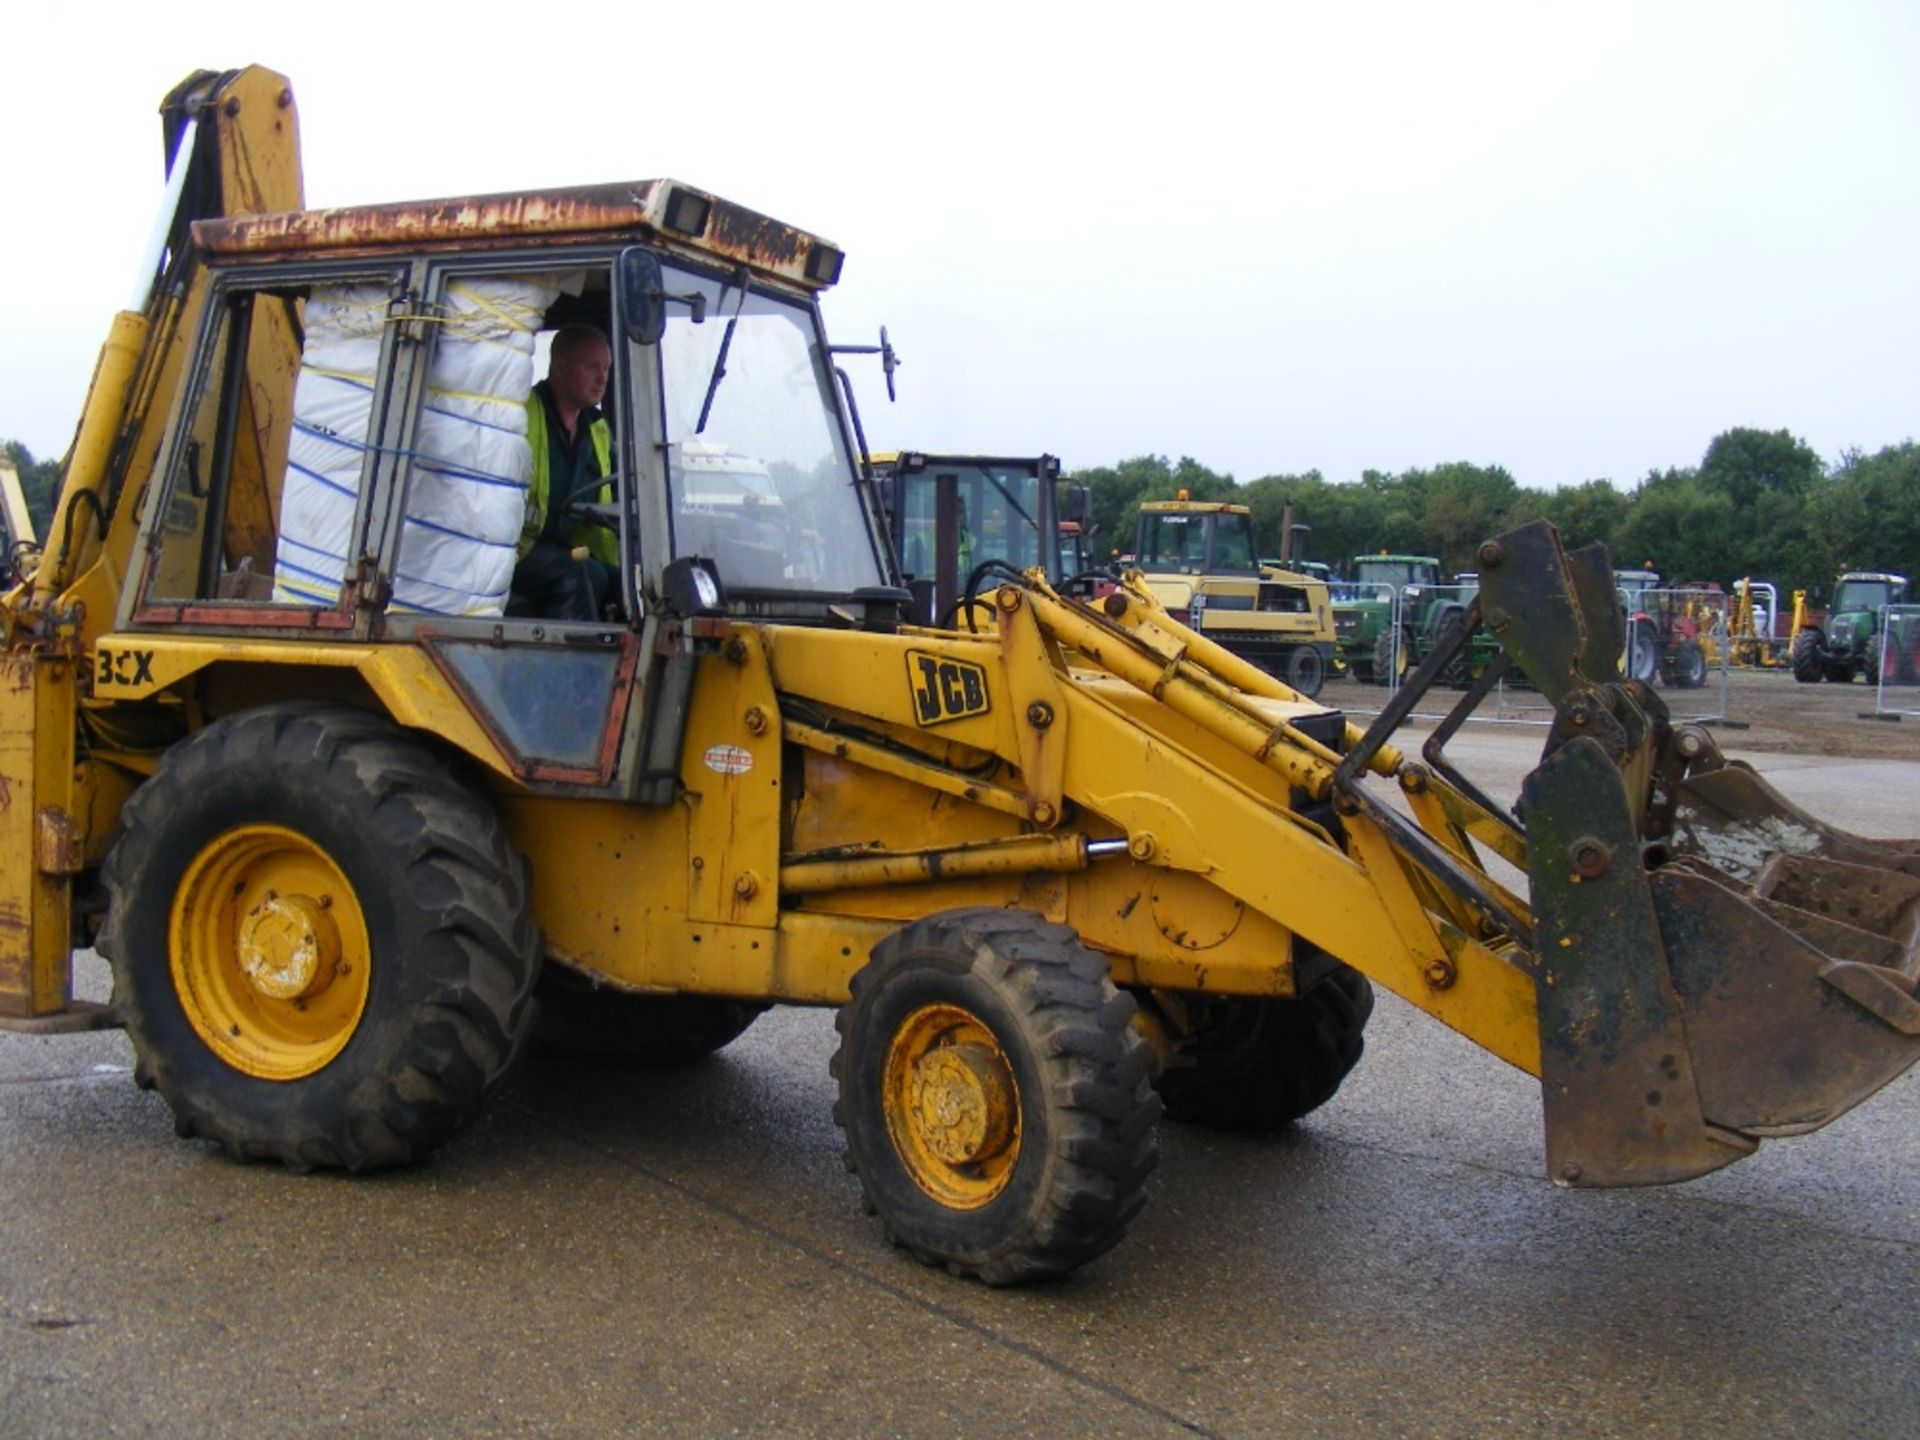 JCB 3CX Turbo Digger Loader with 5 Stud Rear Axle, 4 in 1 Extender, 3no. Buckets & Pallet Tines. - Image 4 of 7